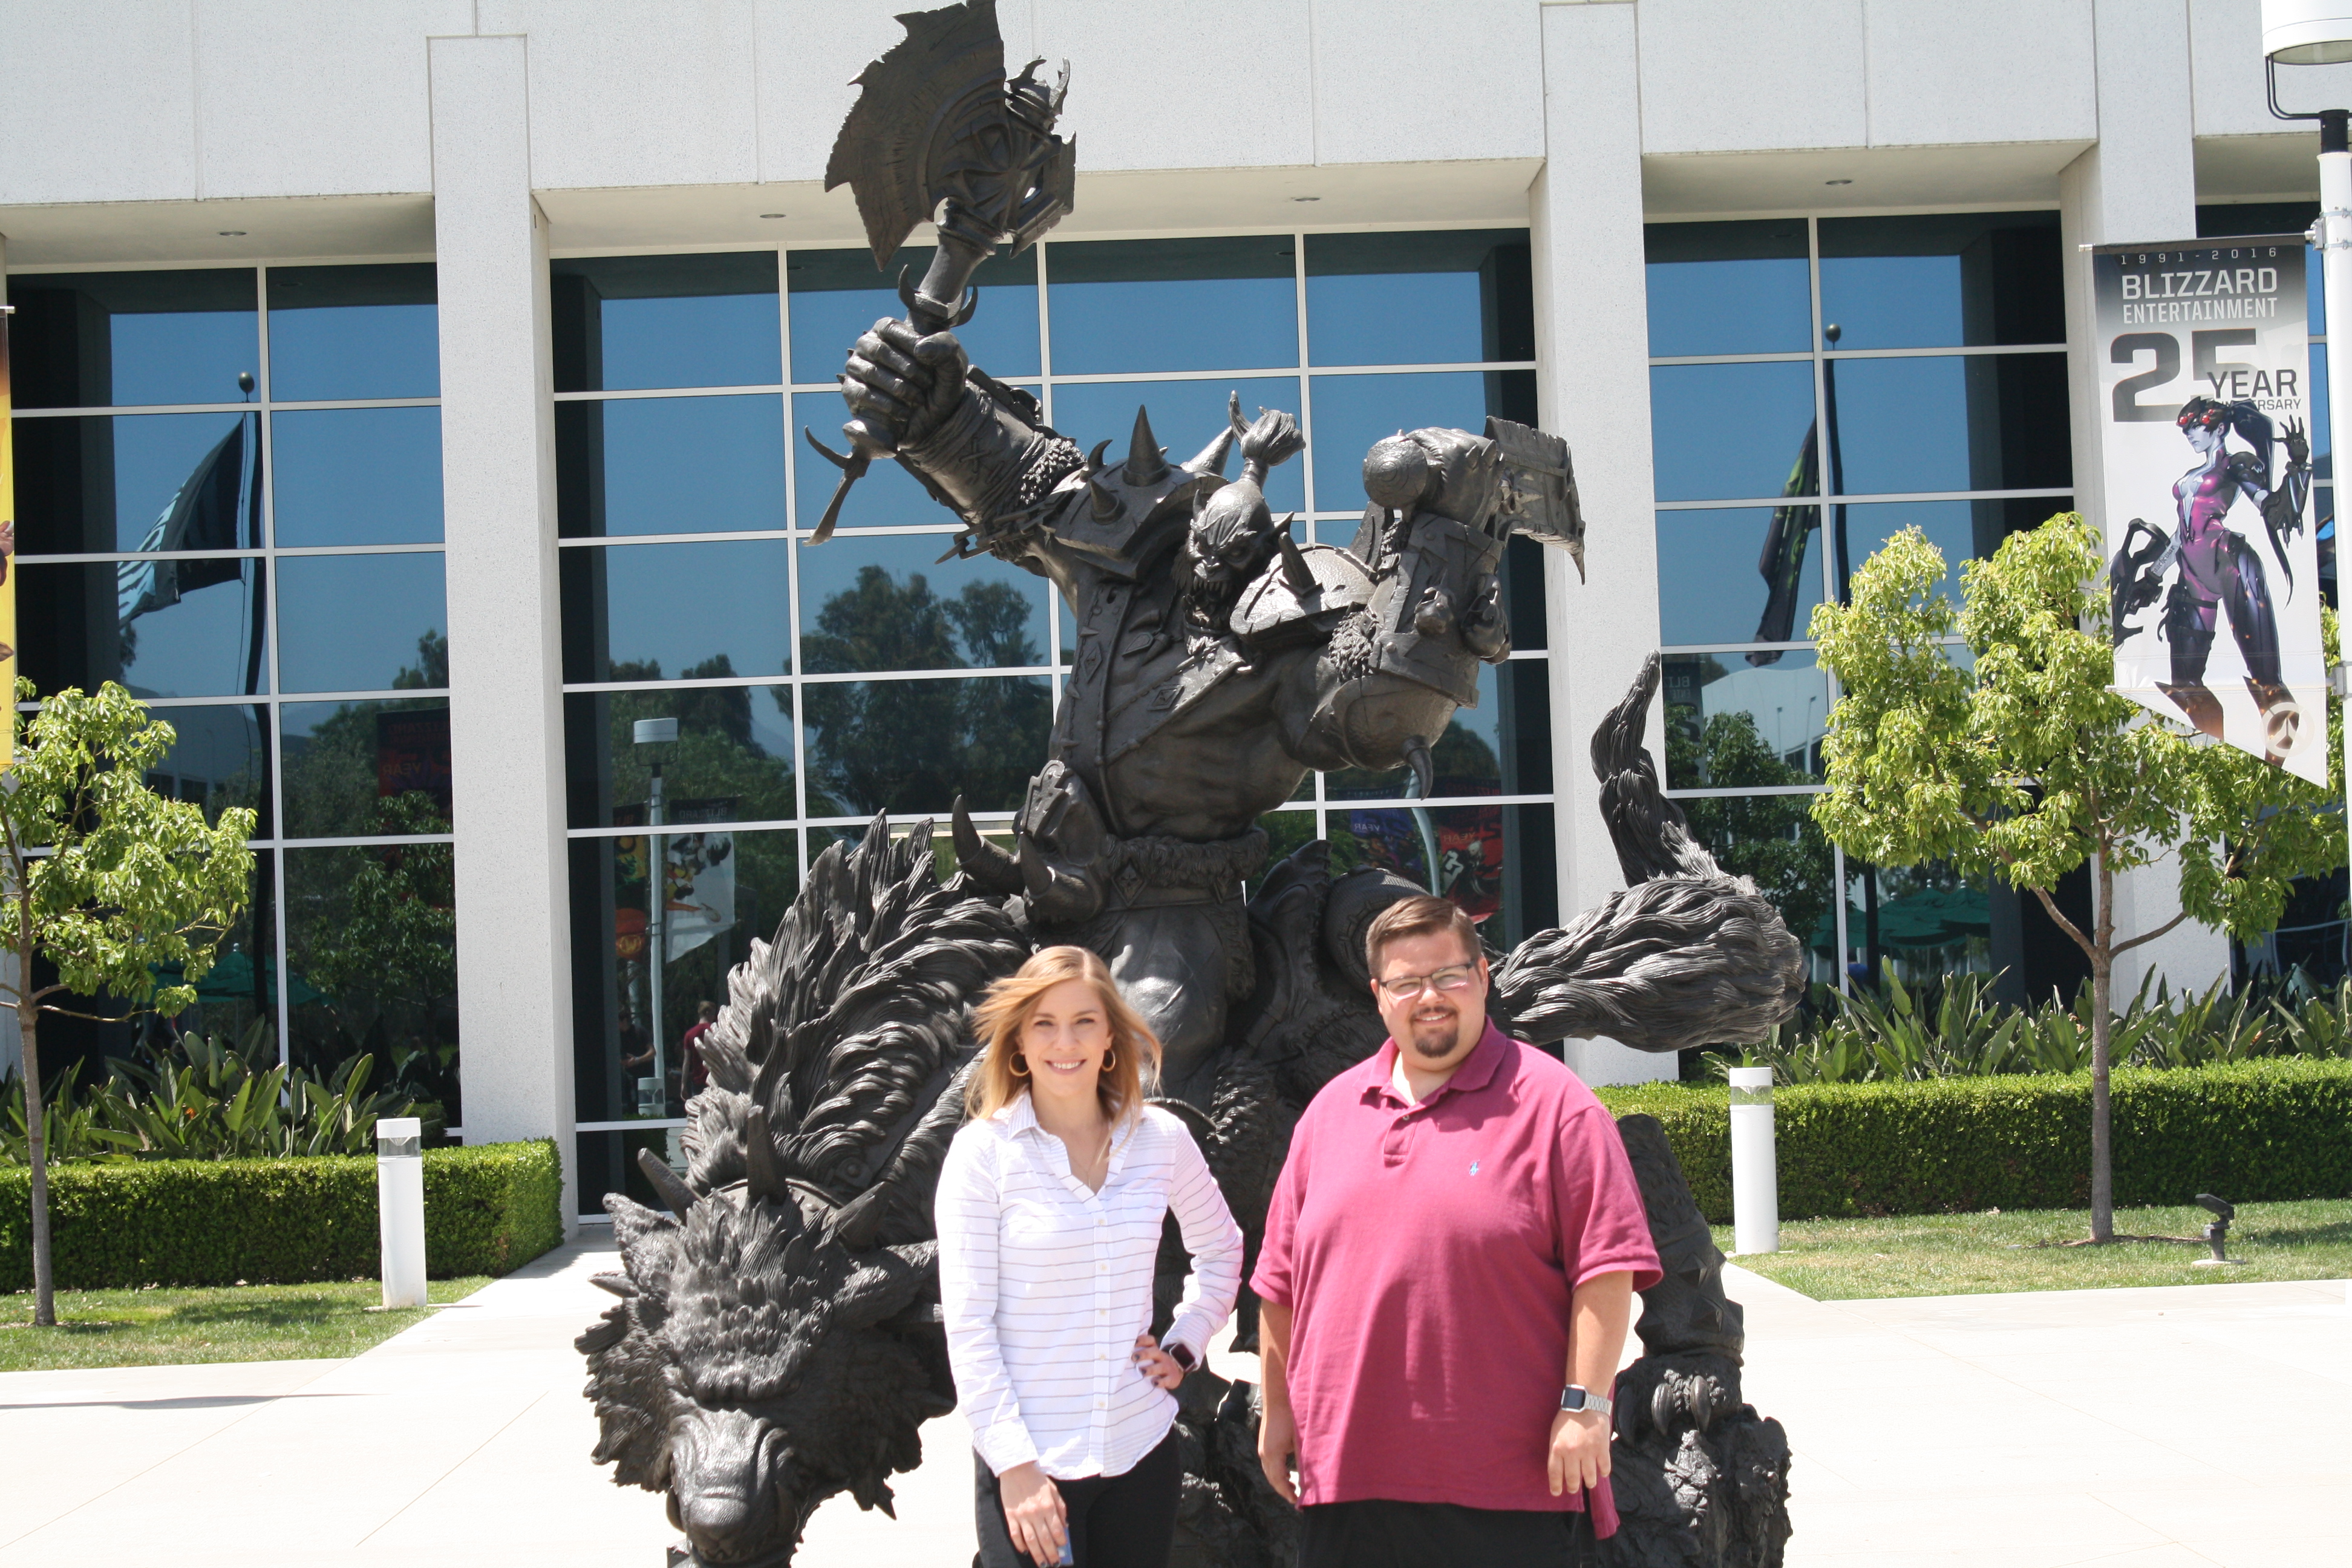 Fowler School of Law, Blizzard Entertainment, video games, eSports